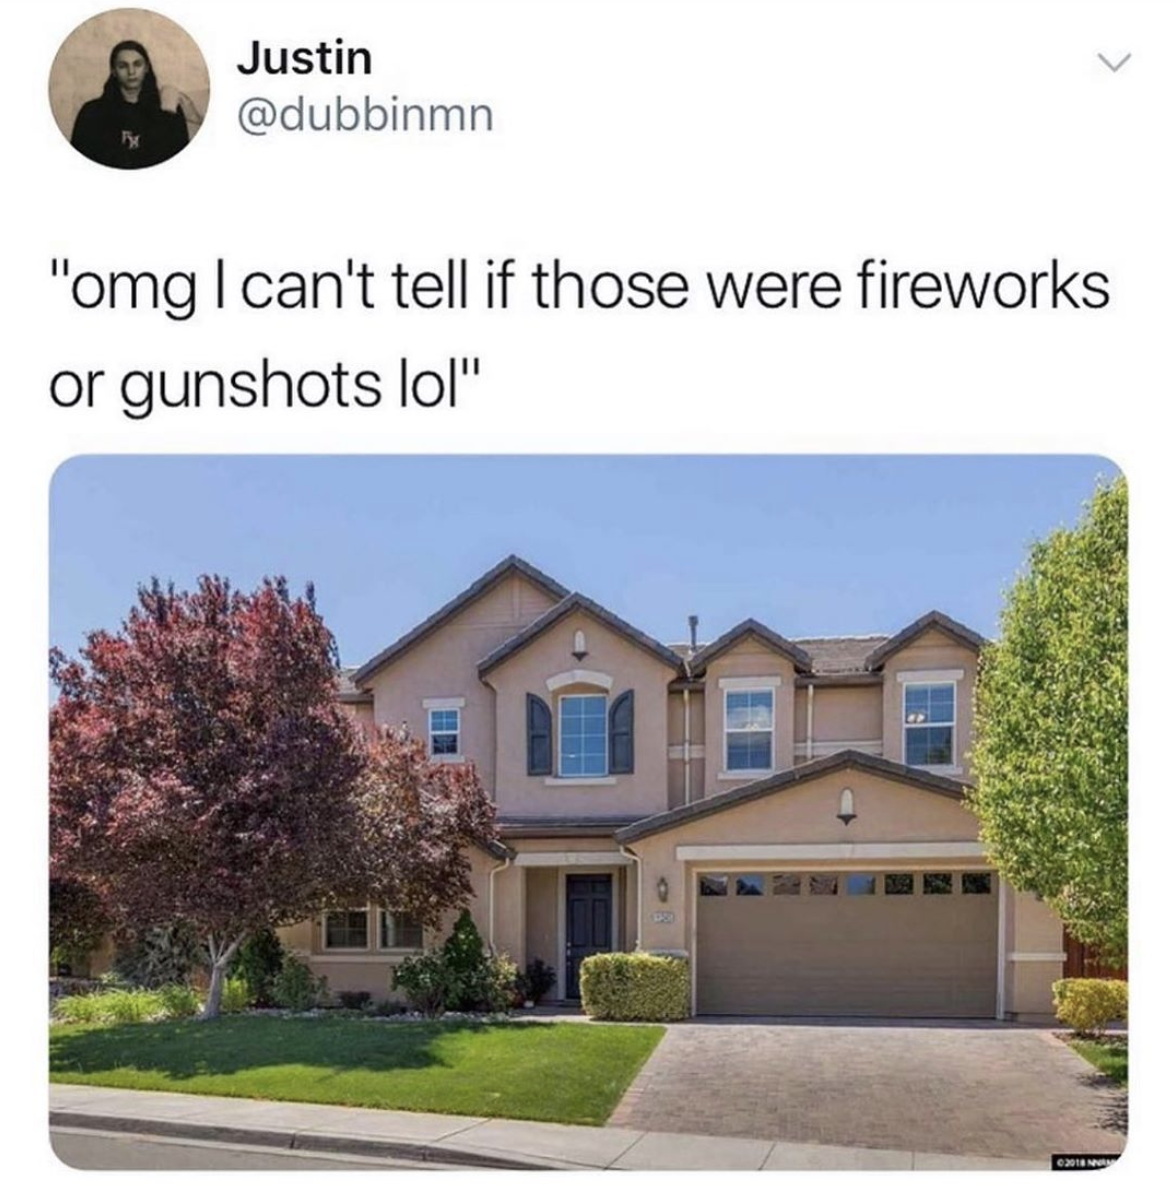 i can't tell if those were fireworks or gunshots, 4th of july meme, fourth of july meme, 4th of july memes, funny fourth of july memes, funny 4th of july meme, 4th of july meme 2020, 4th of july memes 2020, 2020 4th of july meme, 2020 4th of july memes, funny 4th of july memes, 4th of july funny memes, funny happy 4th of july memes, funny memes 4th of july, hilarious 4th of july memes, independence day 2020 meme, independence day 2020 memes, 2020 independence day meme, quarantine 4th of july meme, coronavirus 4th of july meme, covid 4th of july meme, fourth of july memes, independence day meme, independence day memes, funny independence day meme, funny independence day memes, 4th of july 2020 meme, 4th of july 2020 memes, @dubbinmn